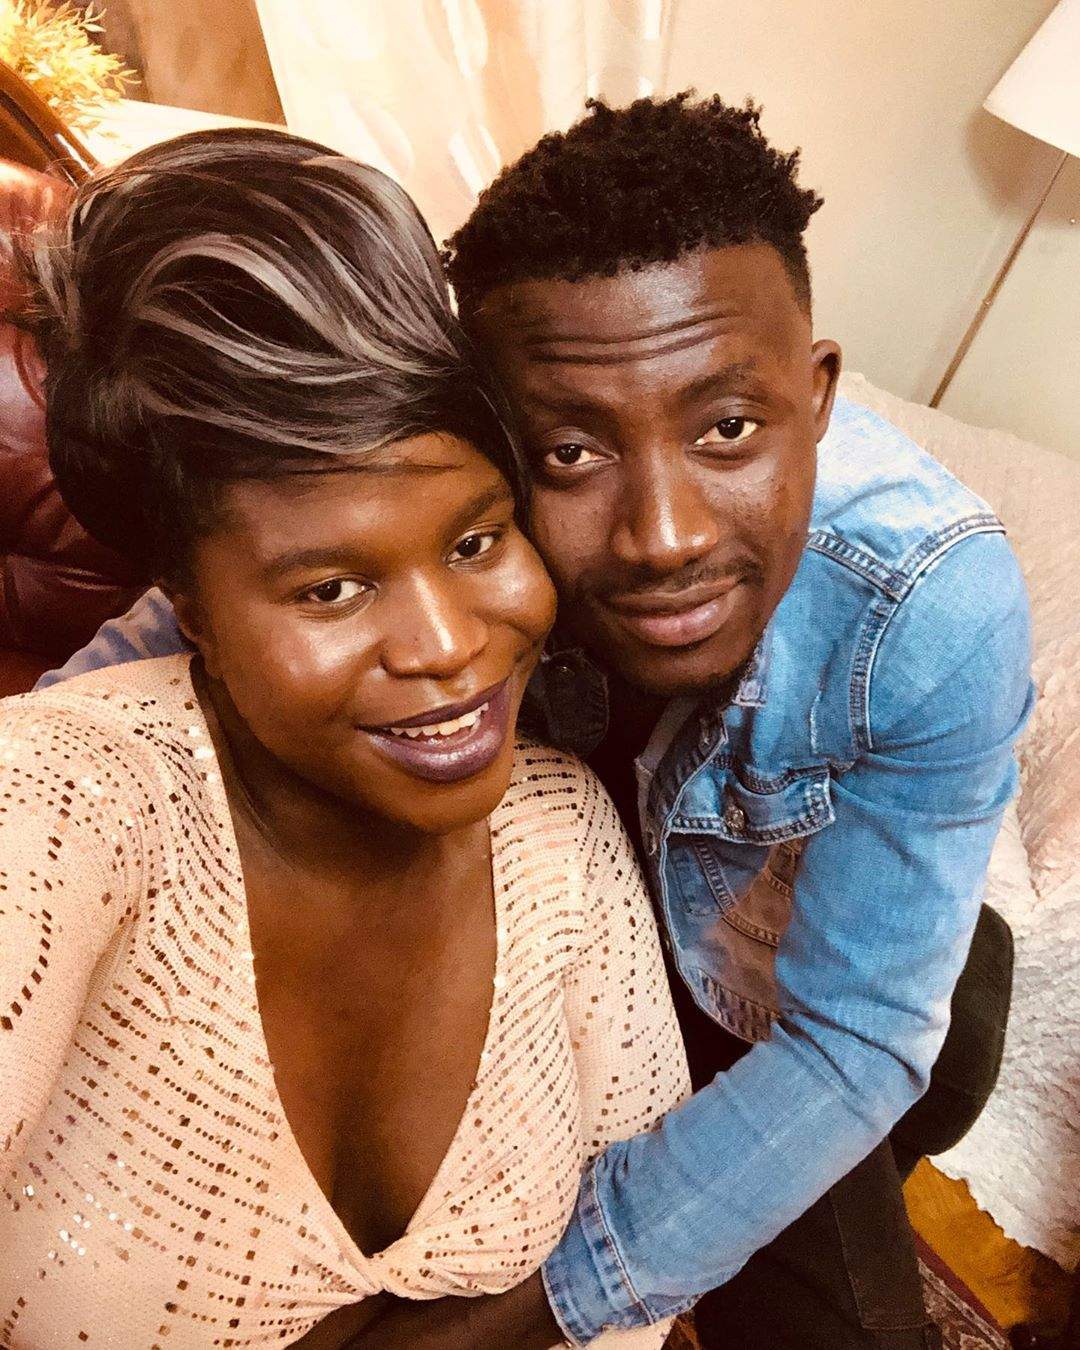 Zimbabwean transgender woman calls out her Nigerian boyfriend as she ends their relationship